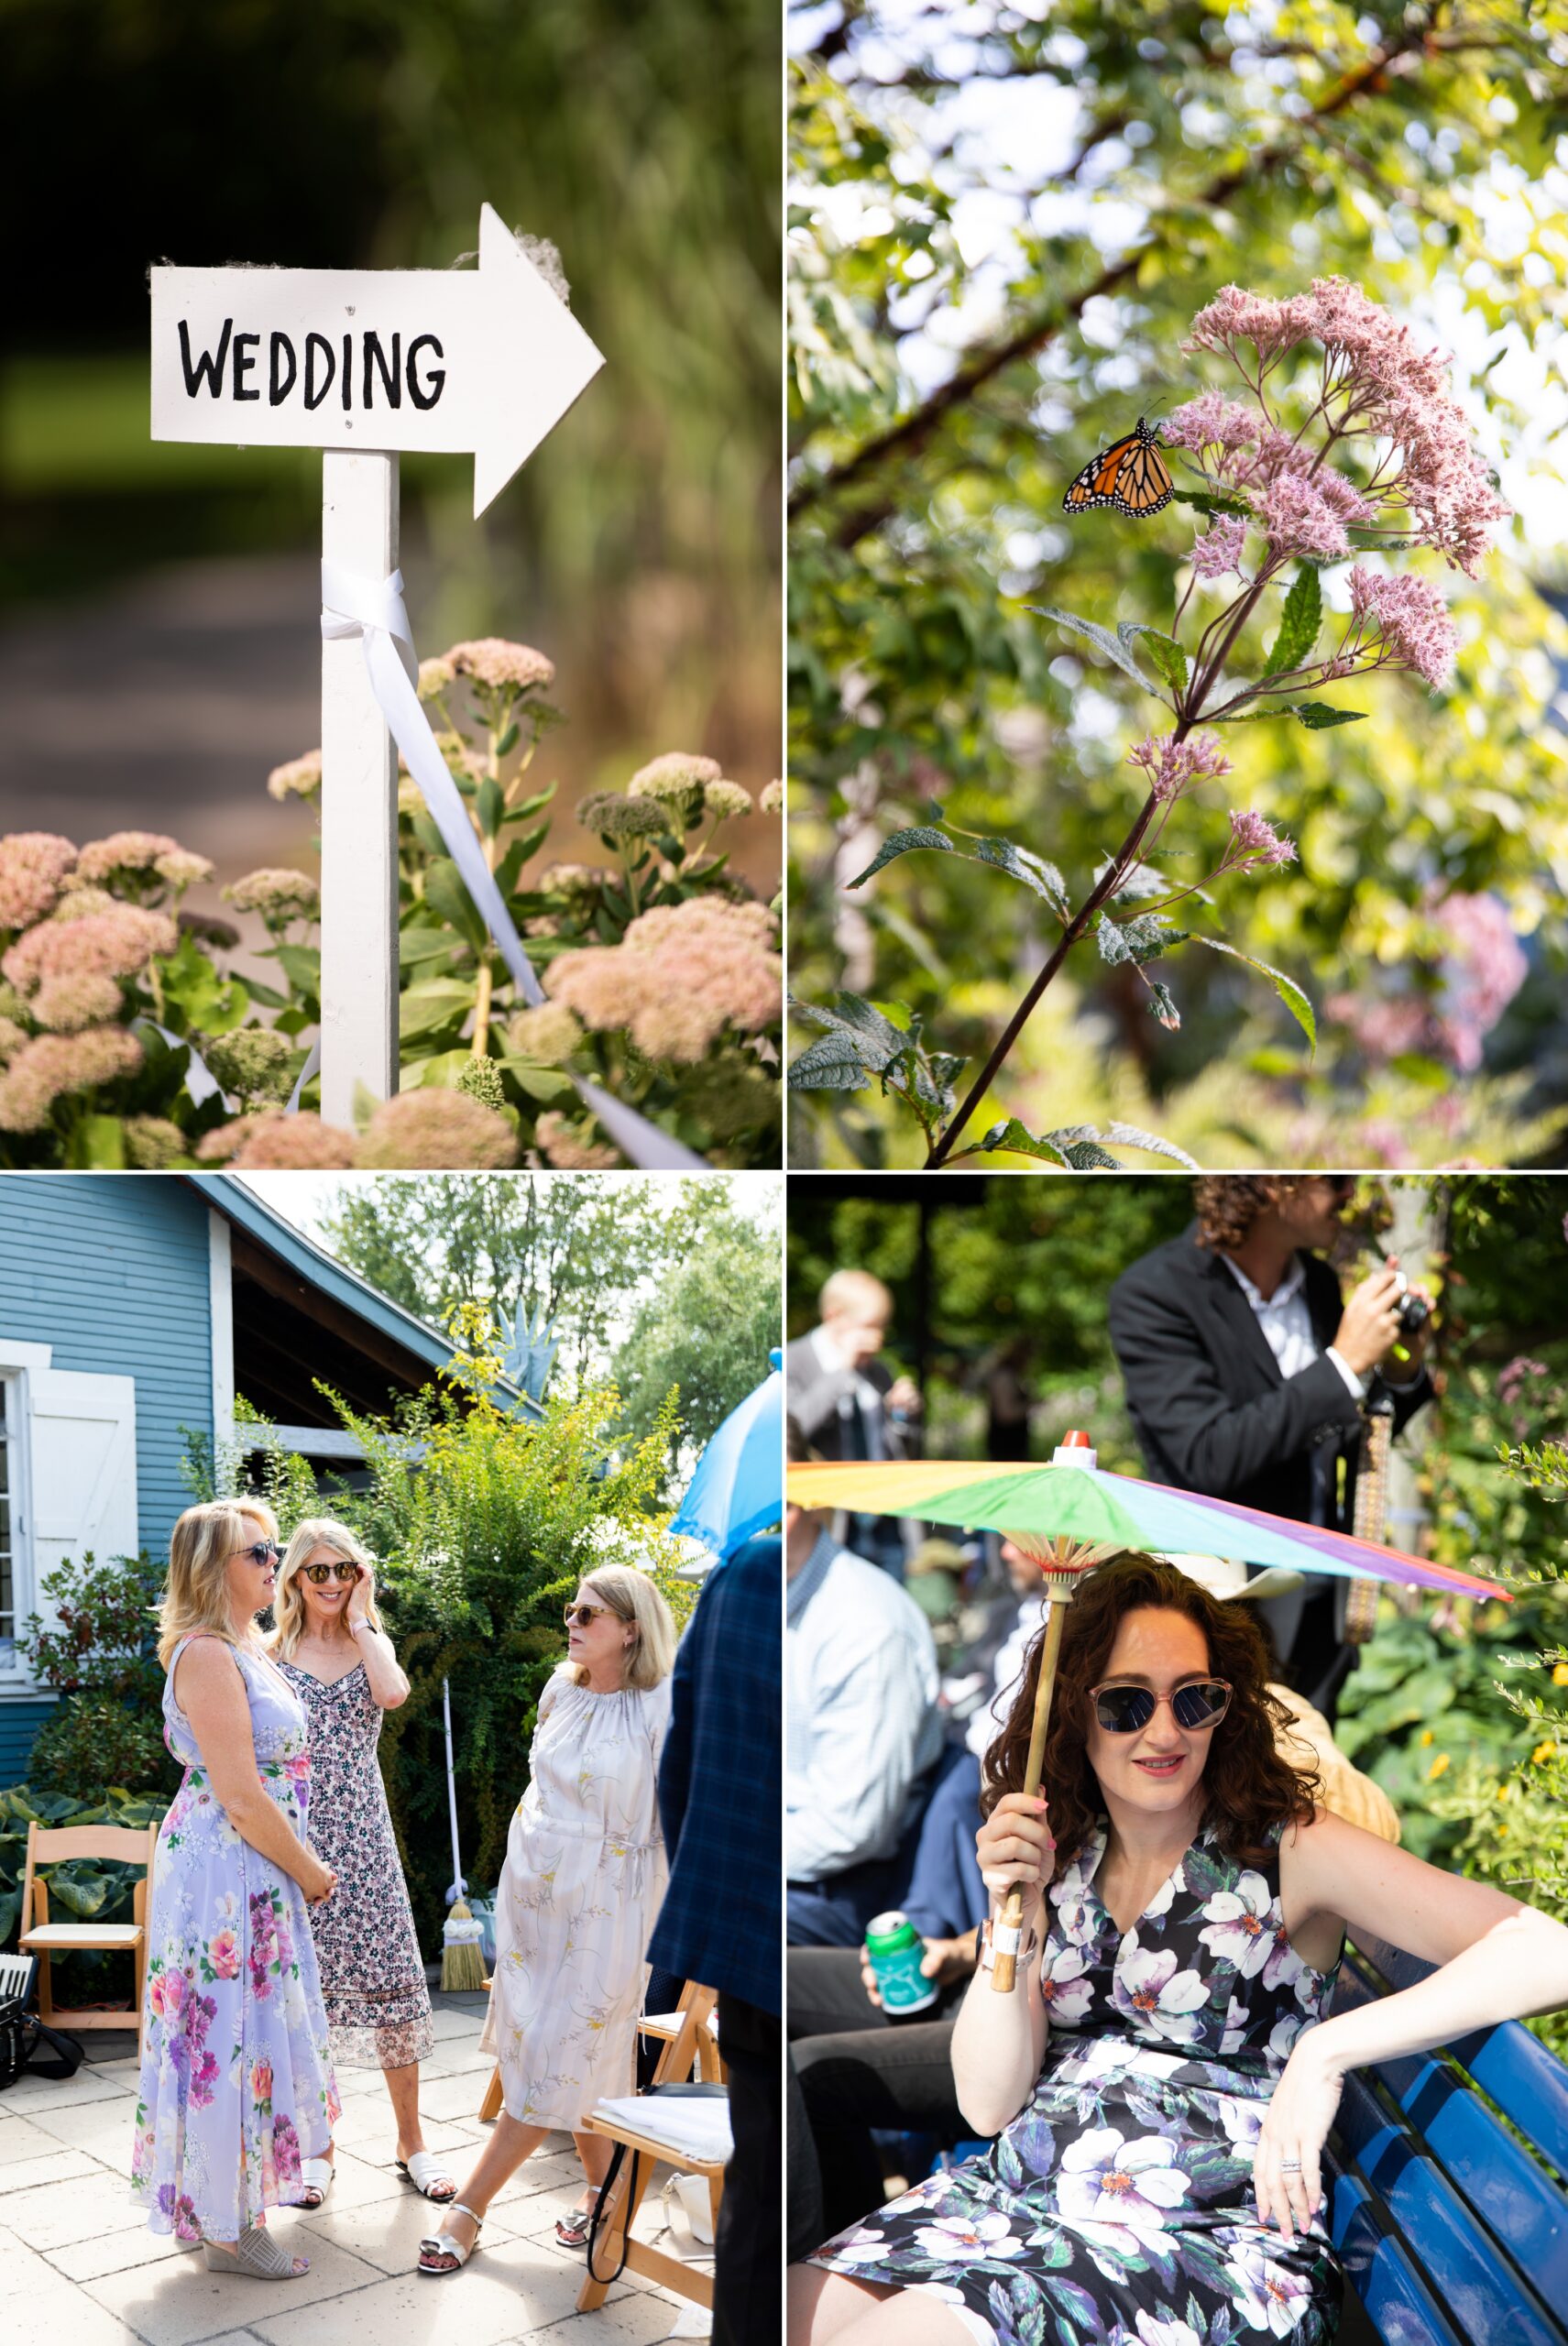 Wedding details, candid guests, monarch butterfly, rainbow parasol